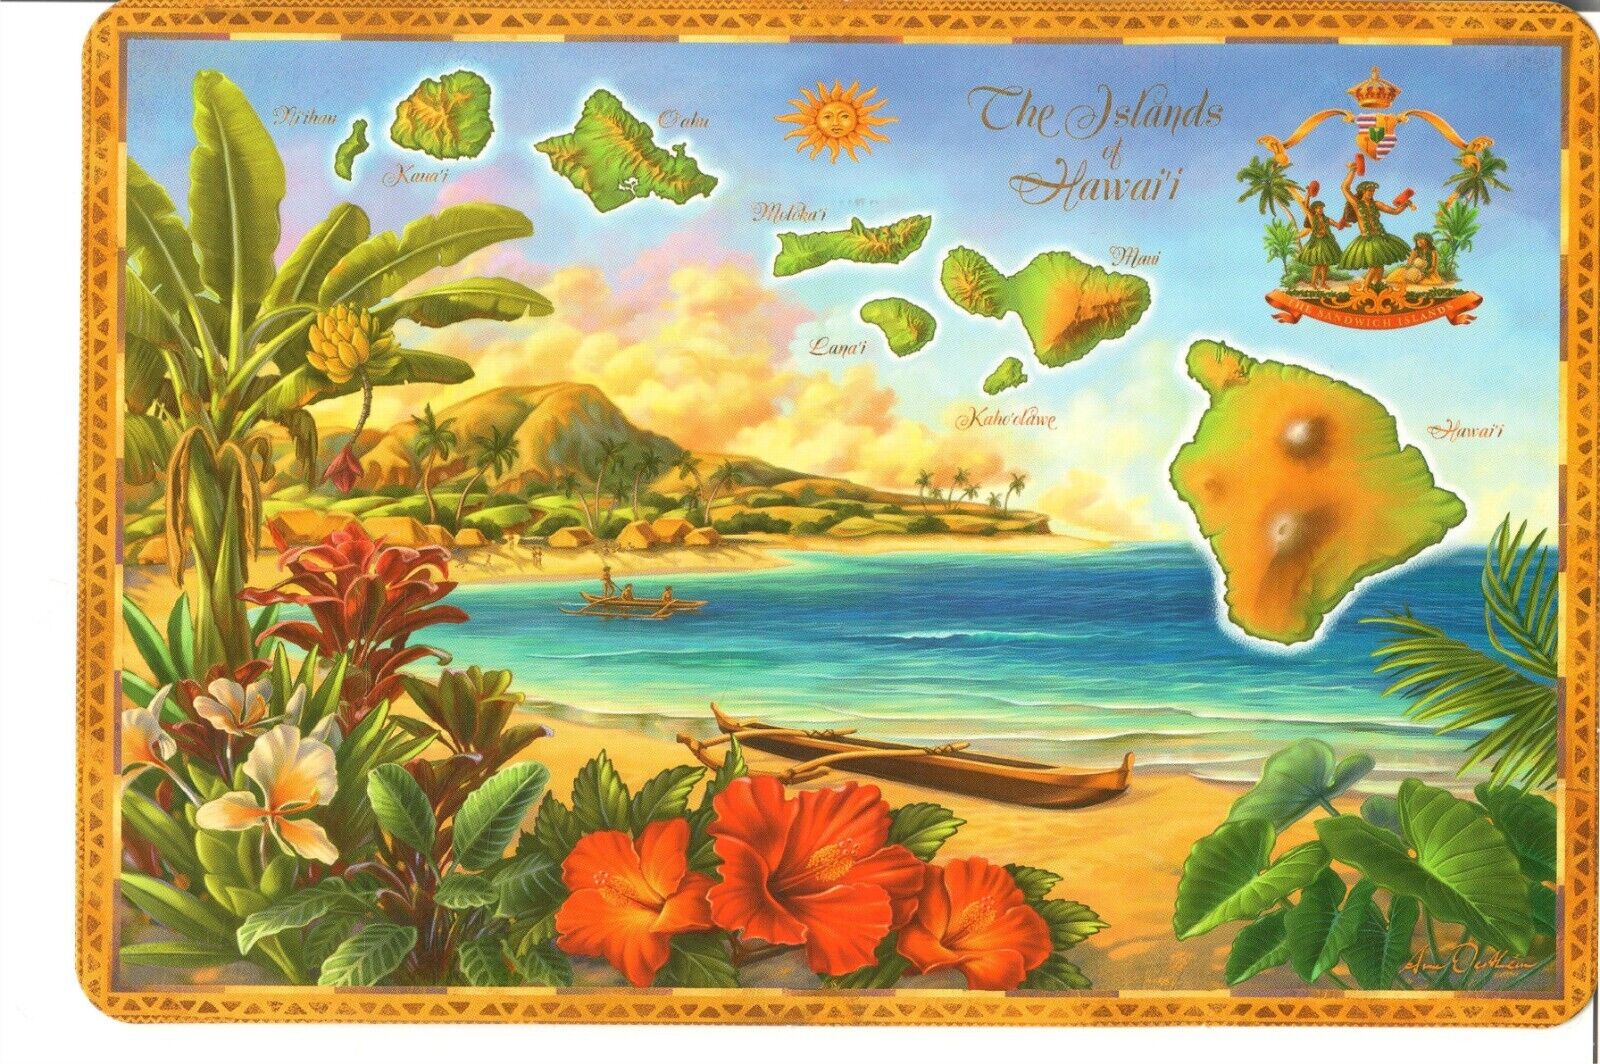 NEW 4x6 Postcard The Islands of Hawaii map landscape beach unposted